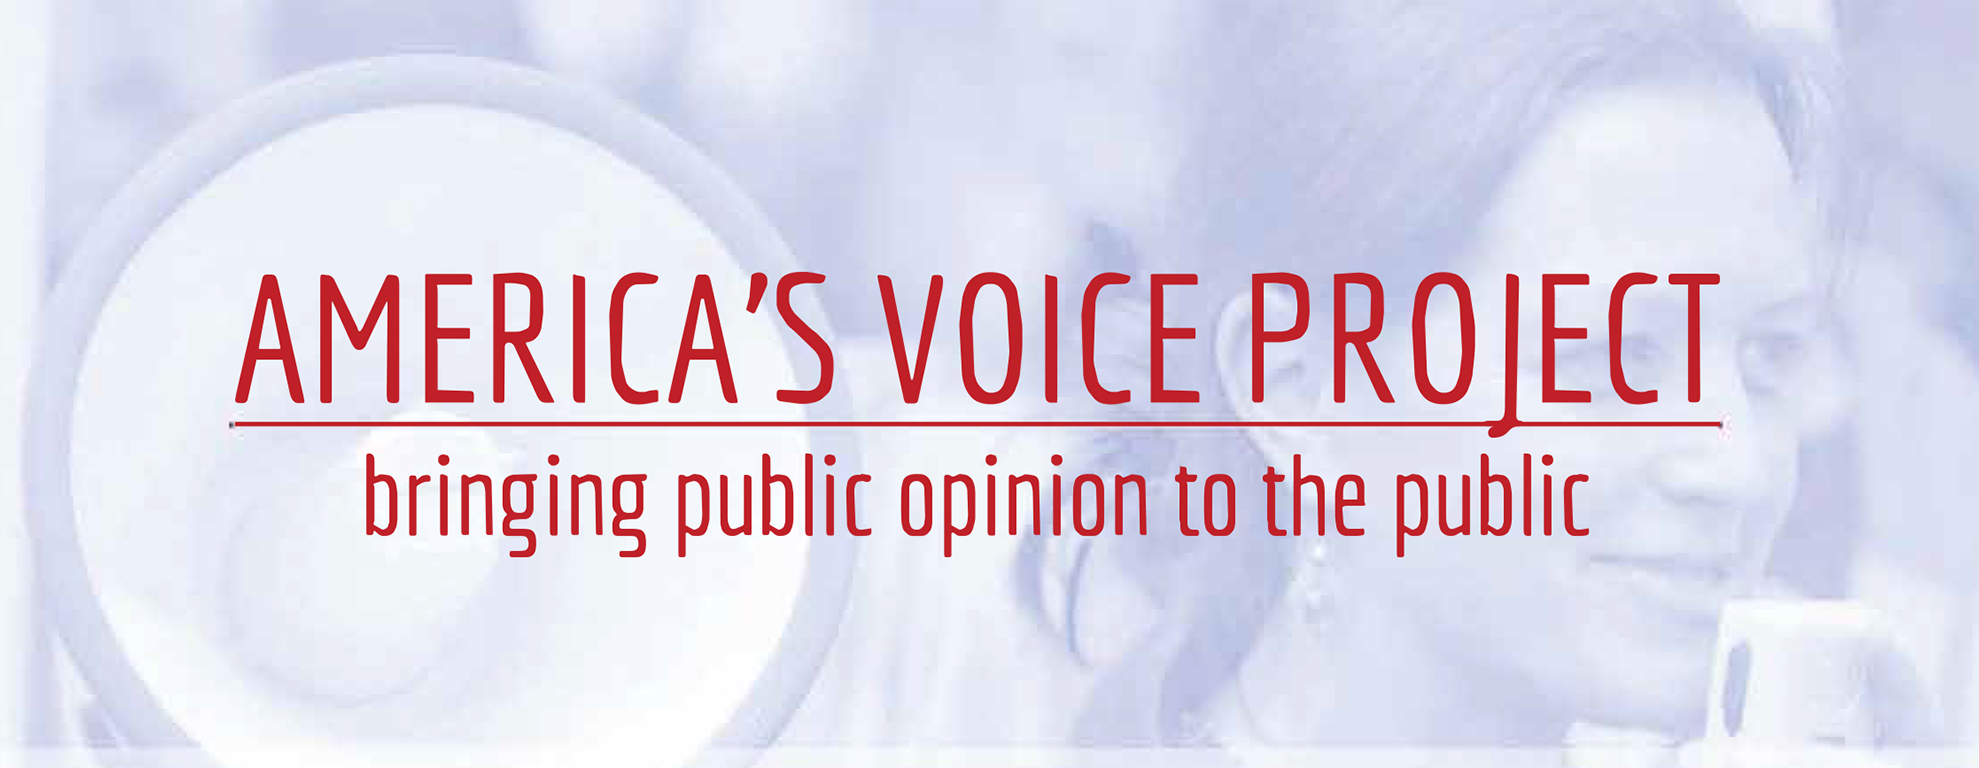 America's Voice Project